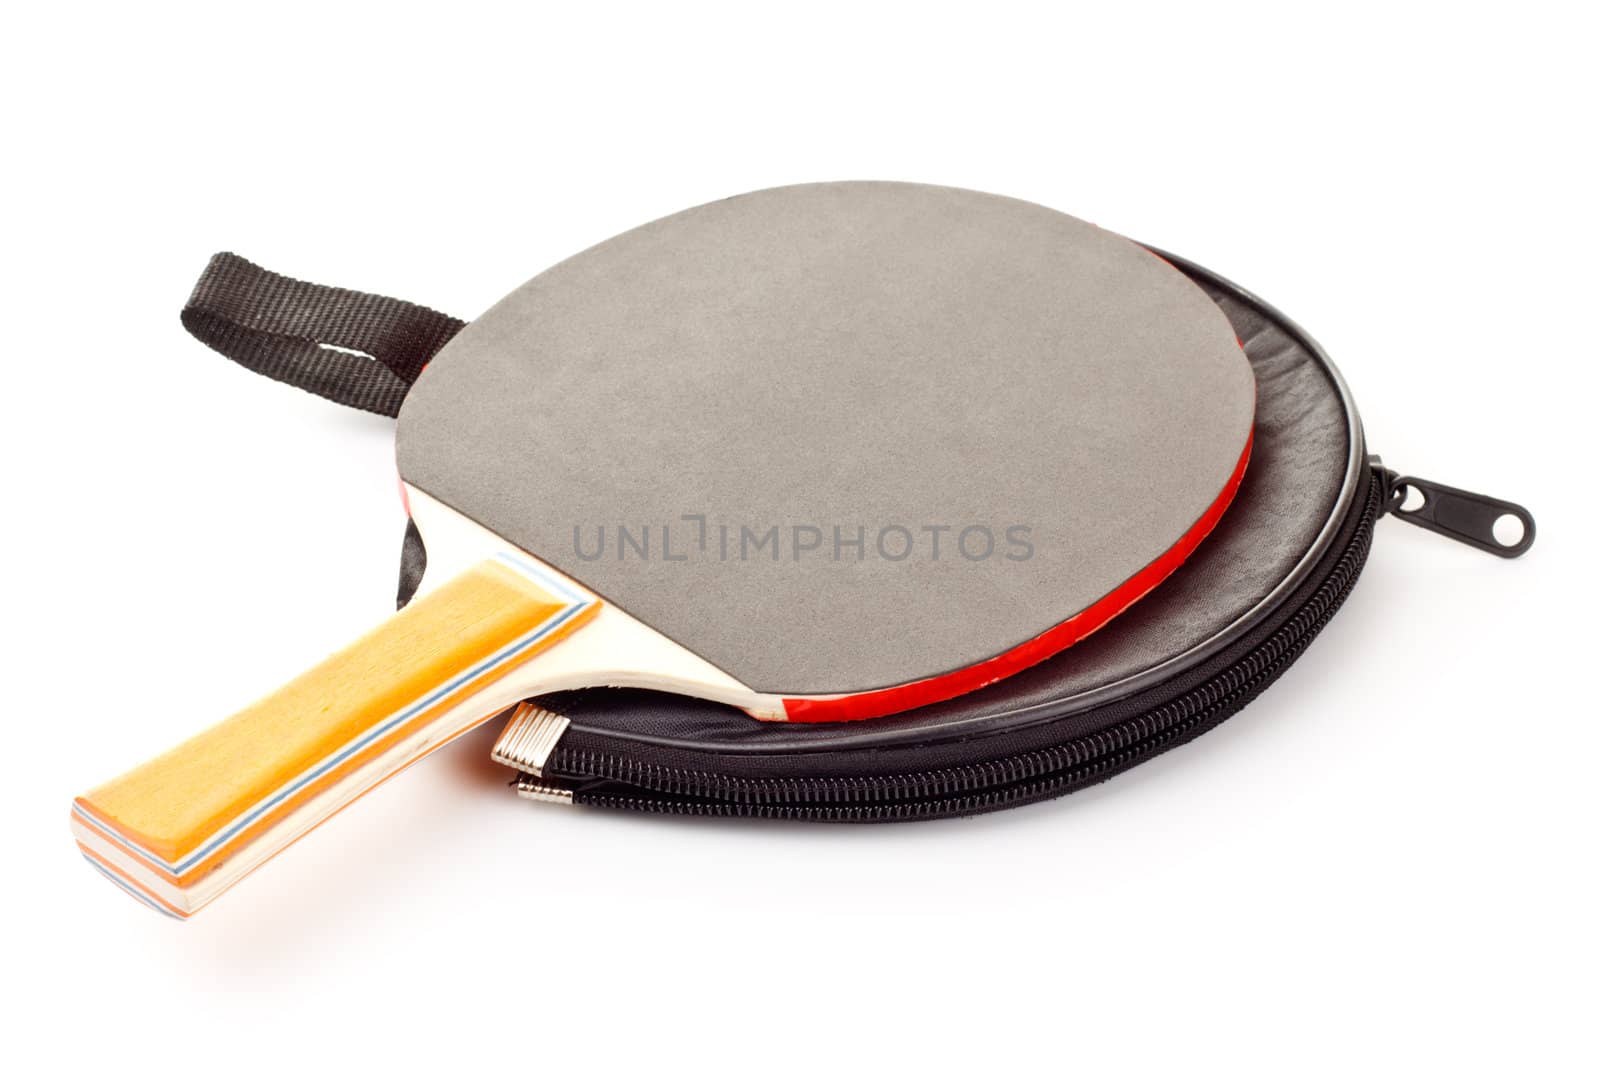 table tennis racket on cover isolated on white